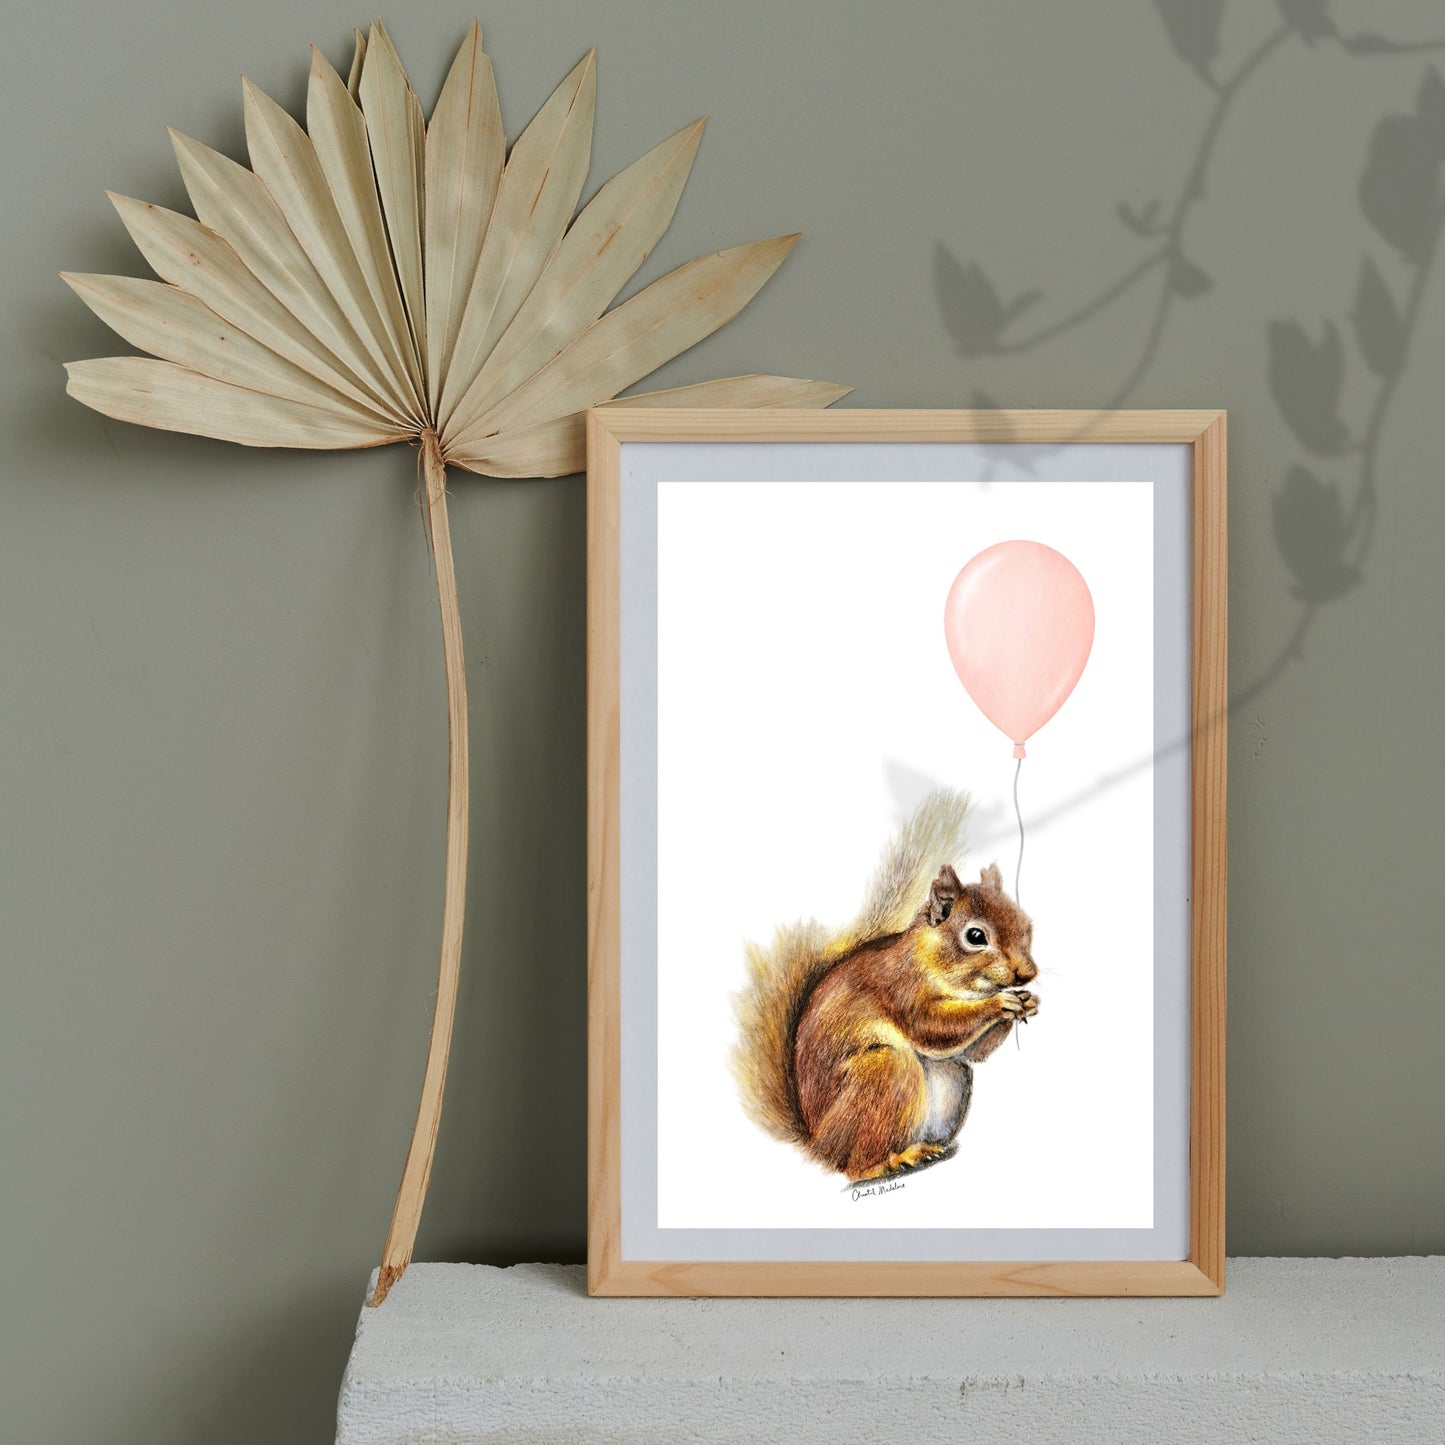 Squirrel With Coral Balloon, Woodland nursery art, Giclee print on fine art paper